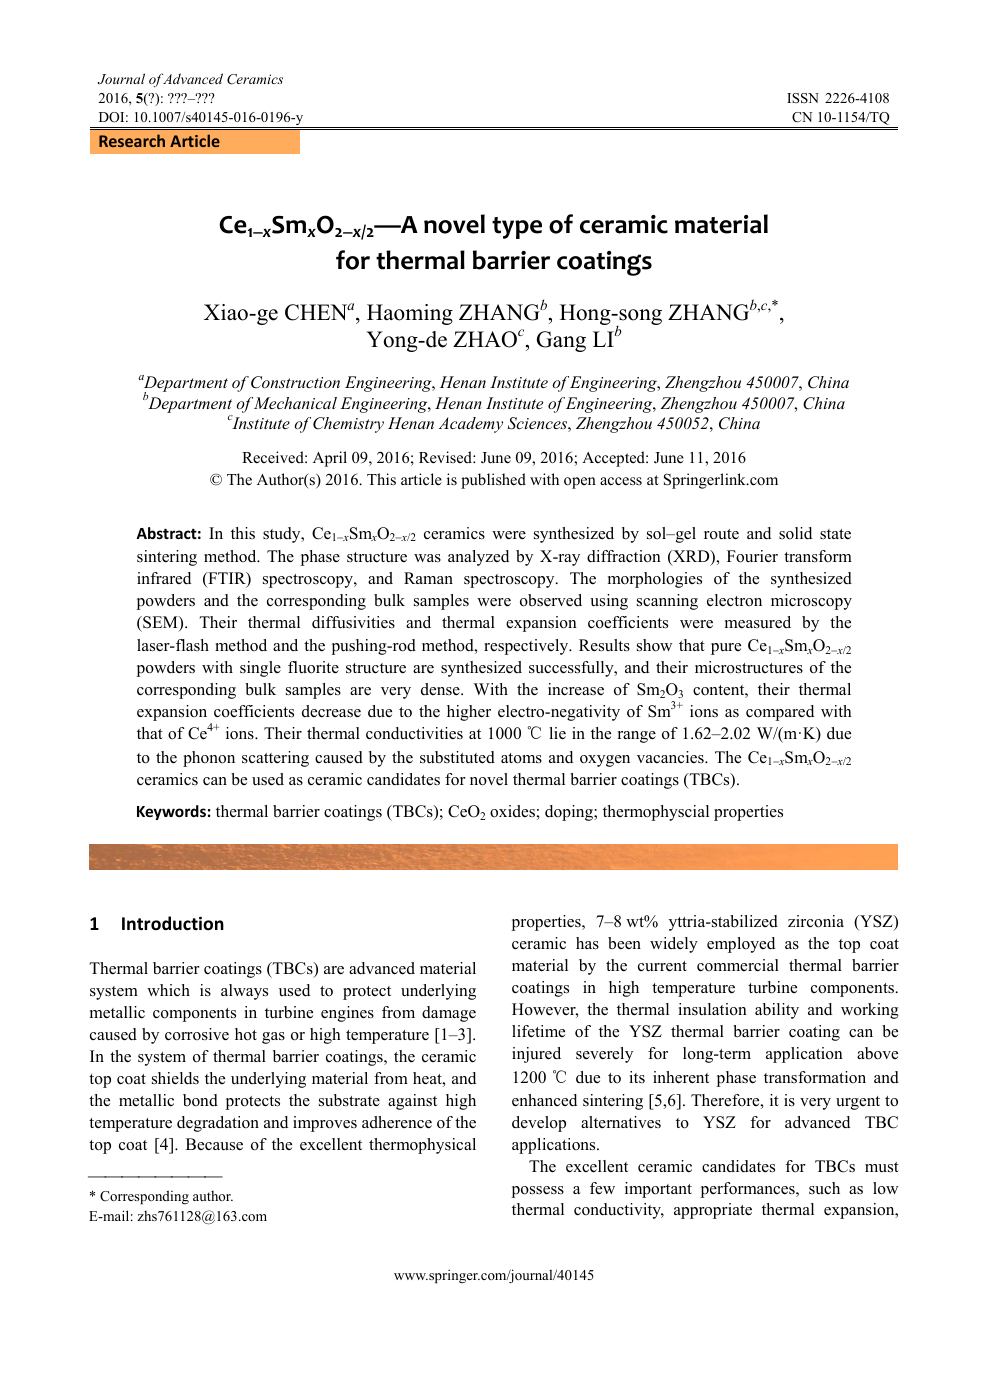 Ce1 X Sm X O2 X 2 A Novel Type Of Ceramic Material For Thermal Barrier Coatings Topic Of Research Paper In Nano Technology Download Scholarly Article Pdf And Read For Free On Cyberleninka Open Science